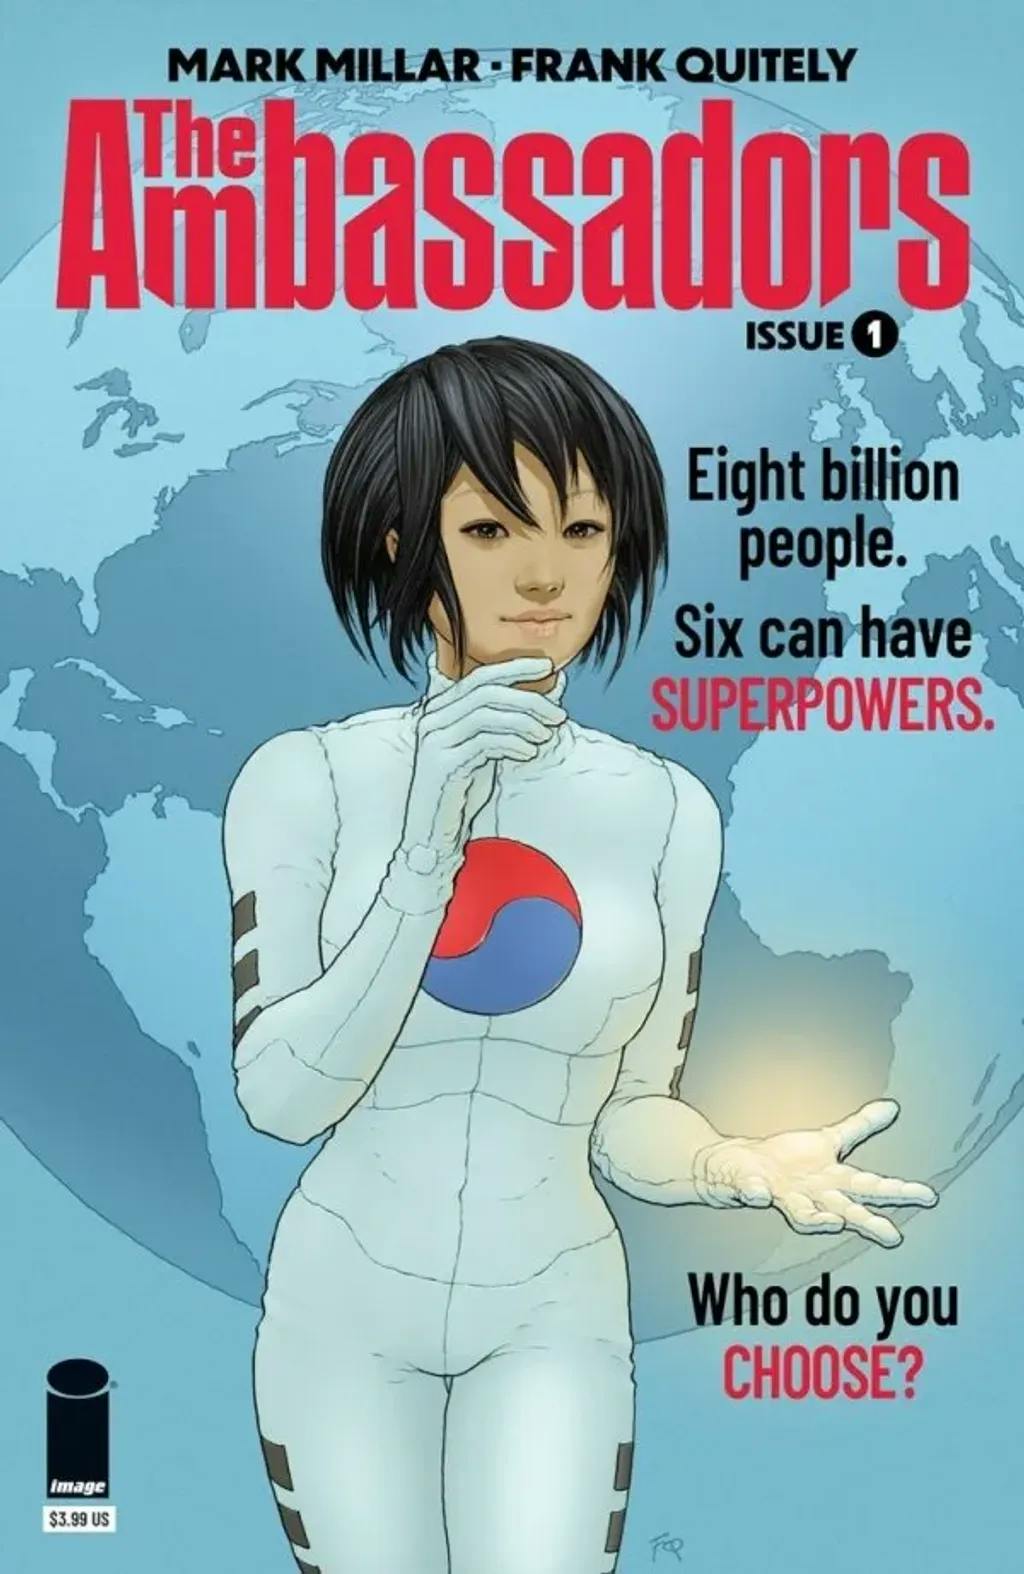 The Ambassadors #1 by Mark Millar and Frank Quitely